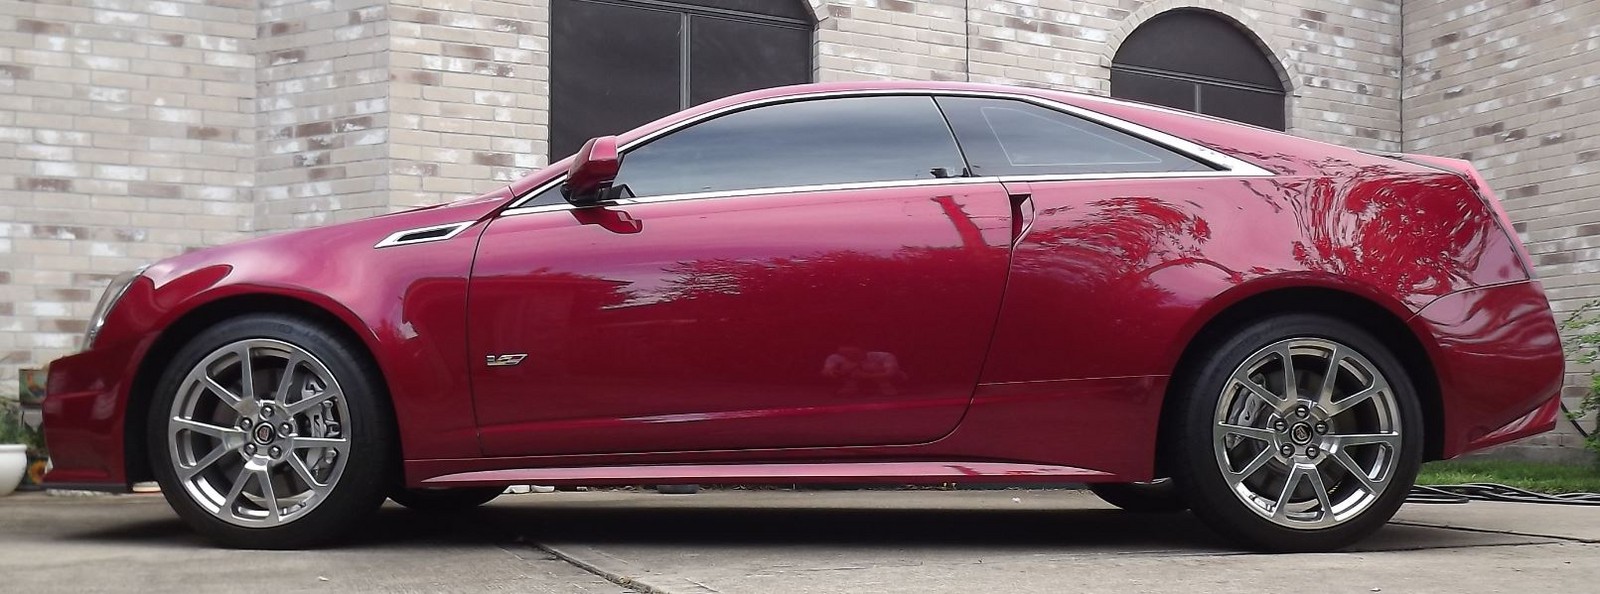 2013 Crystal Red Cadillac CTS-V  picture, mods, upgrades